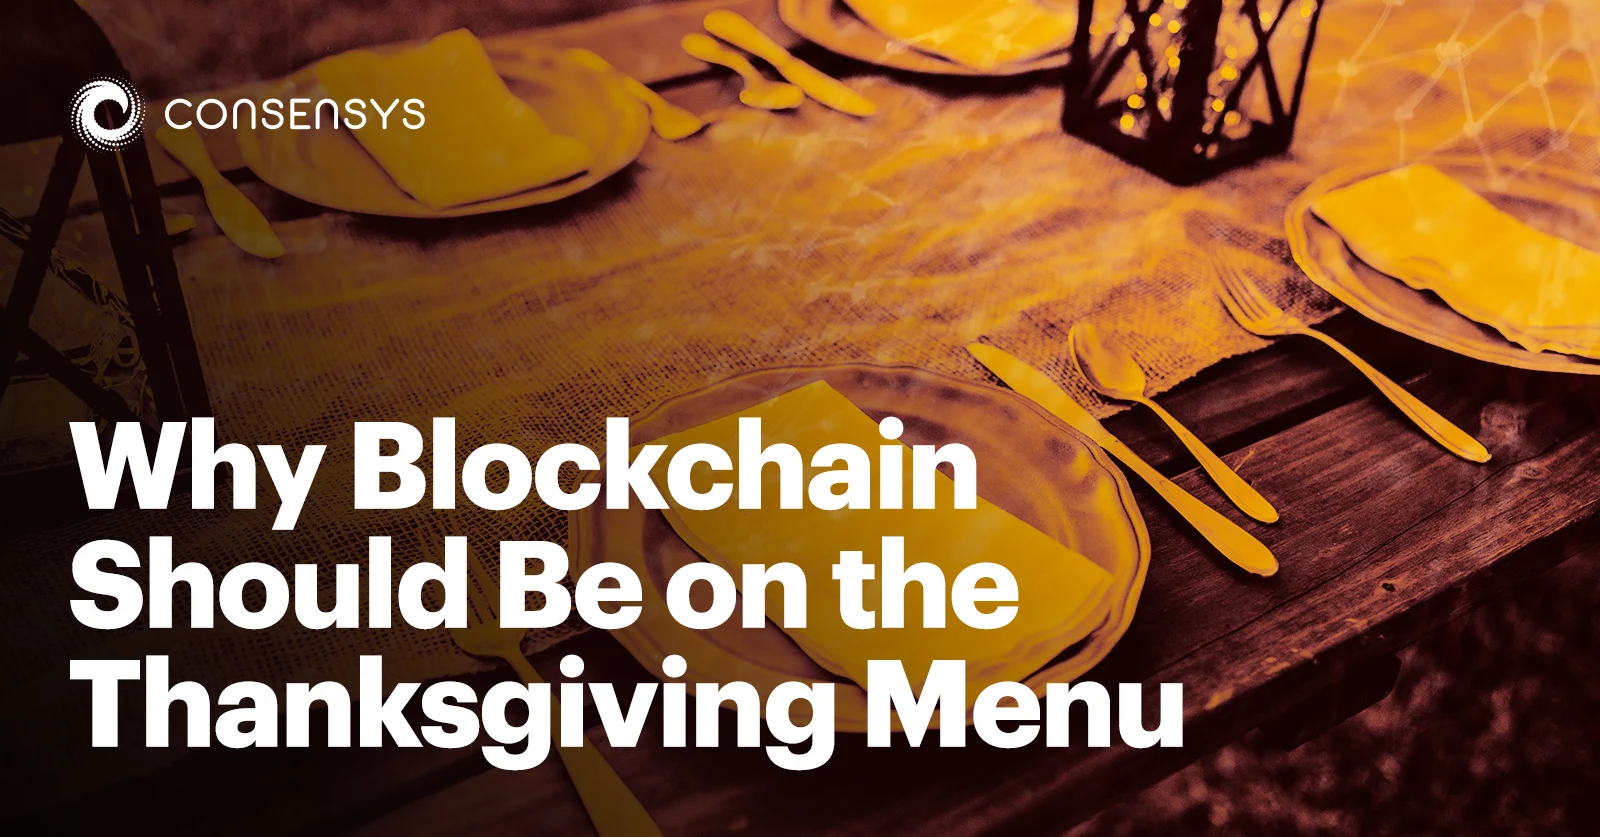 Image: Thanksgiving Conversation Starters: Talk About Blockchain This Holiday